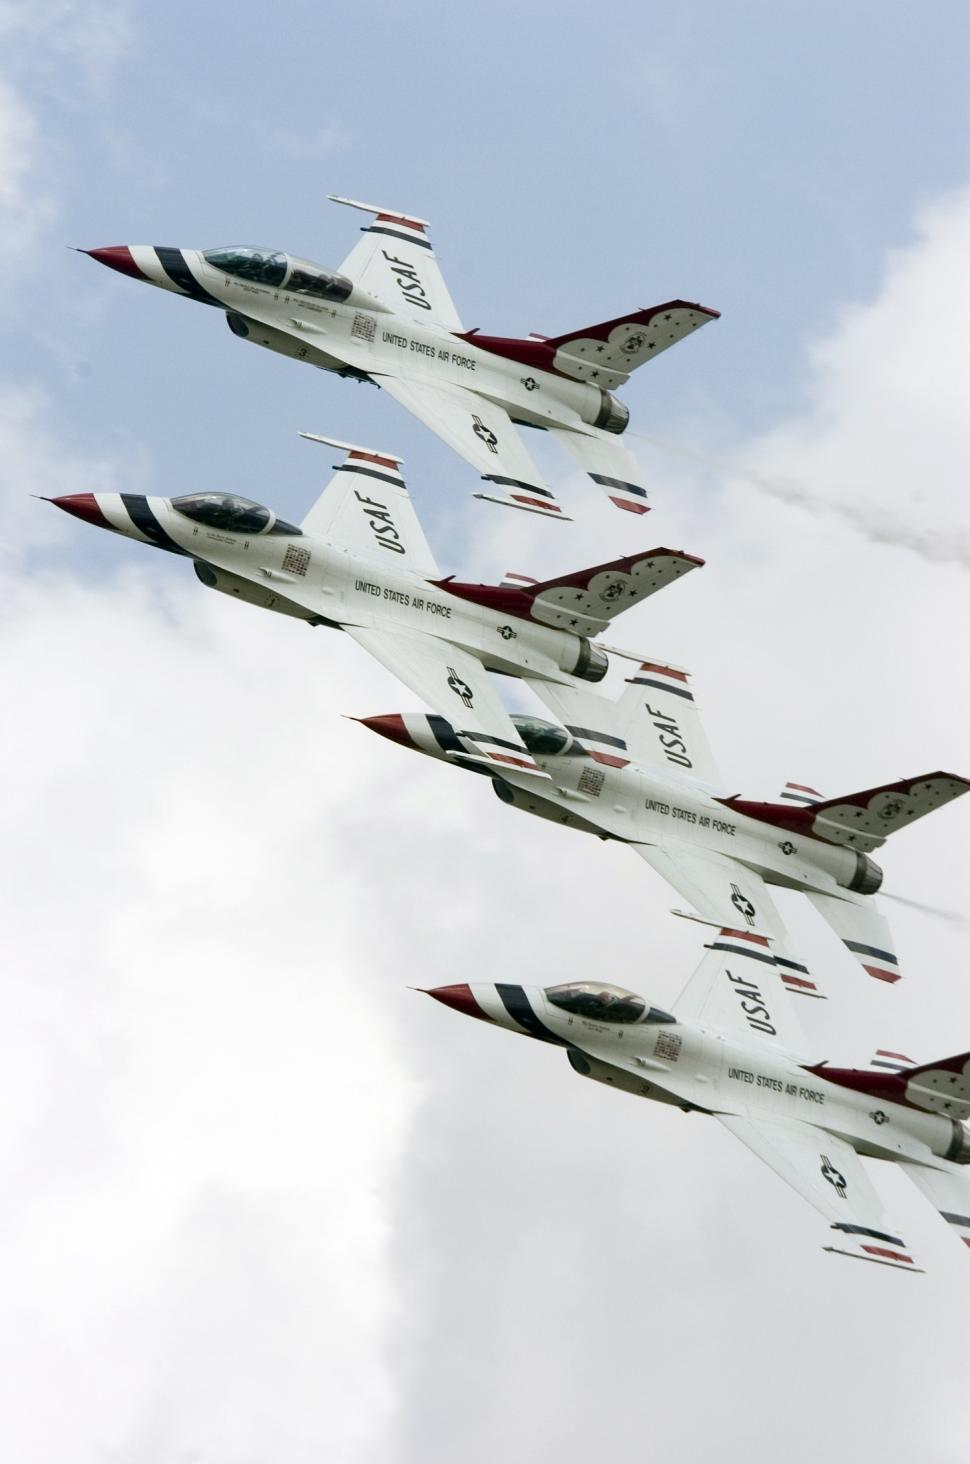 Free Image of Fighter Jets Flying Through a Cloudy Sky 